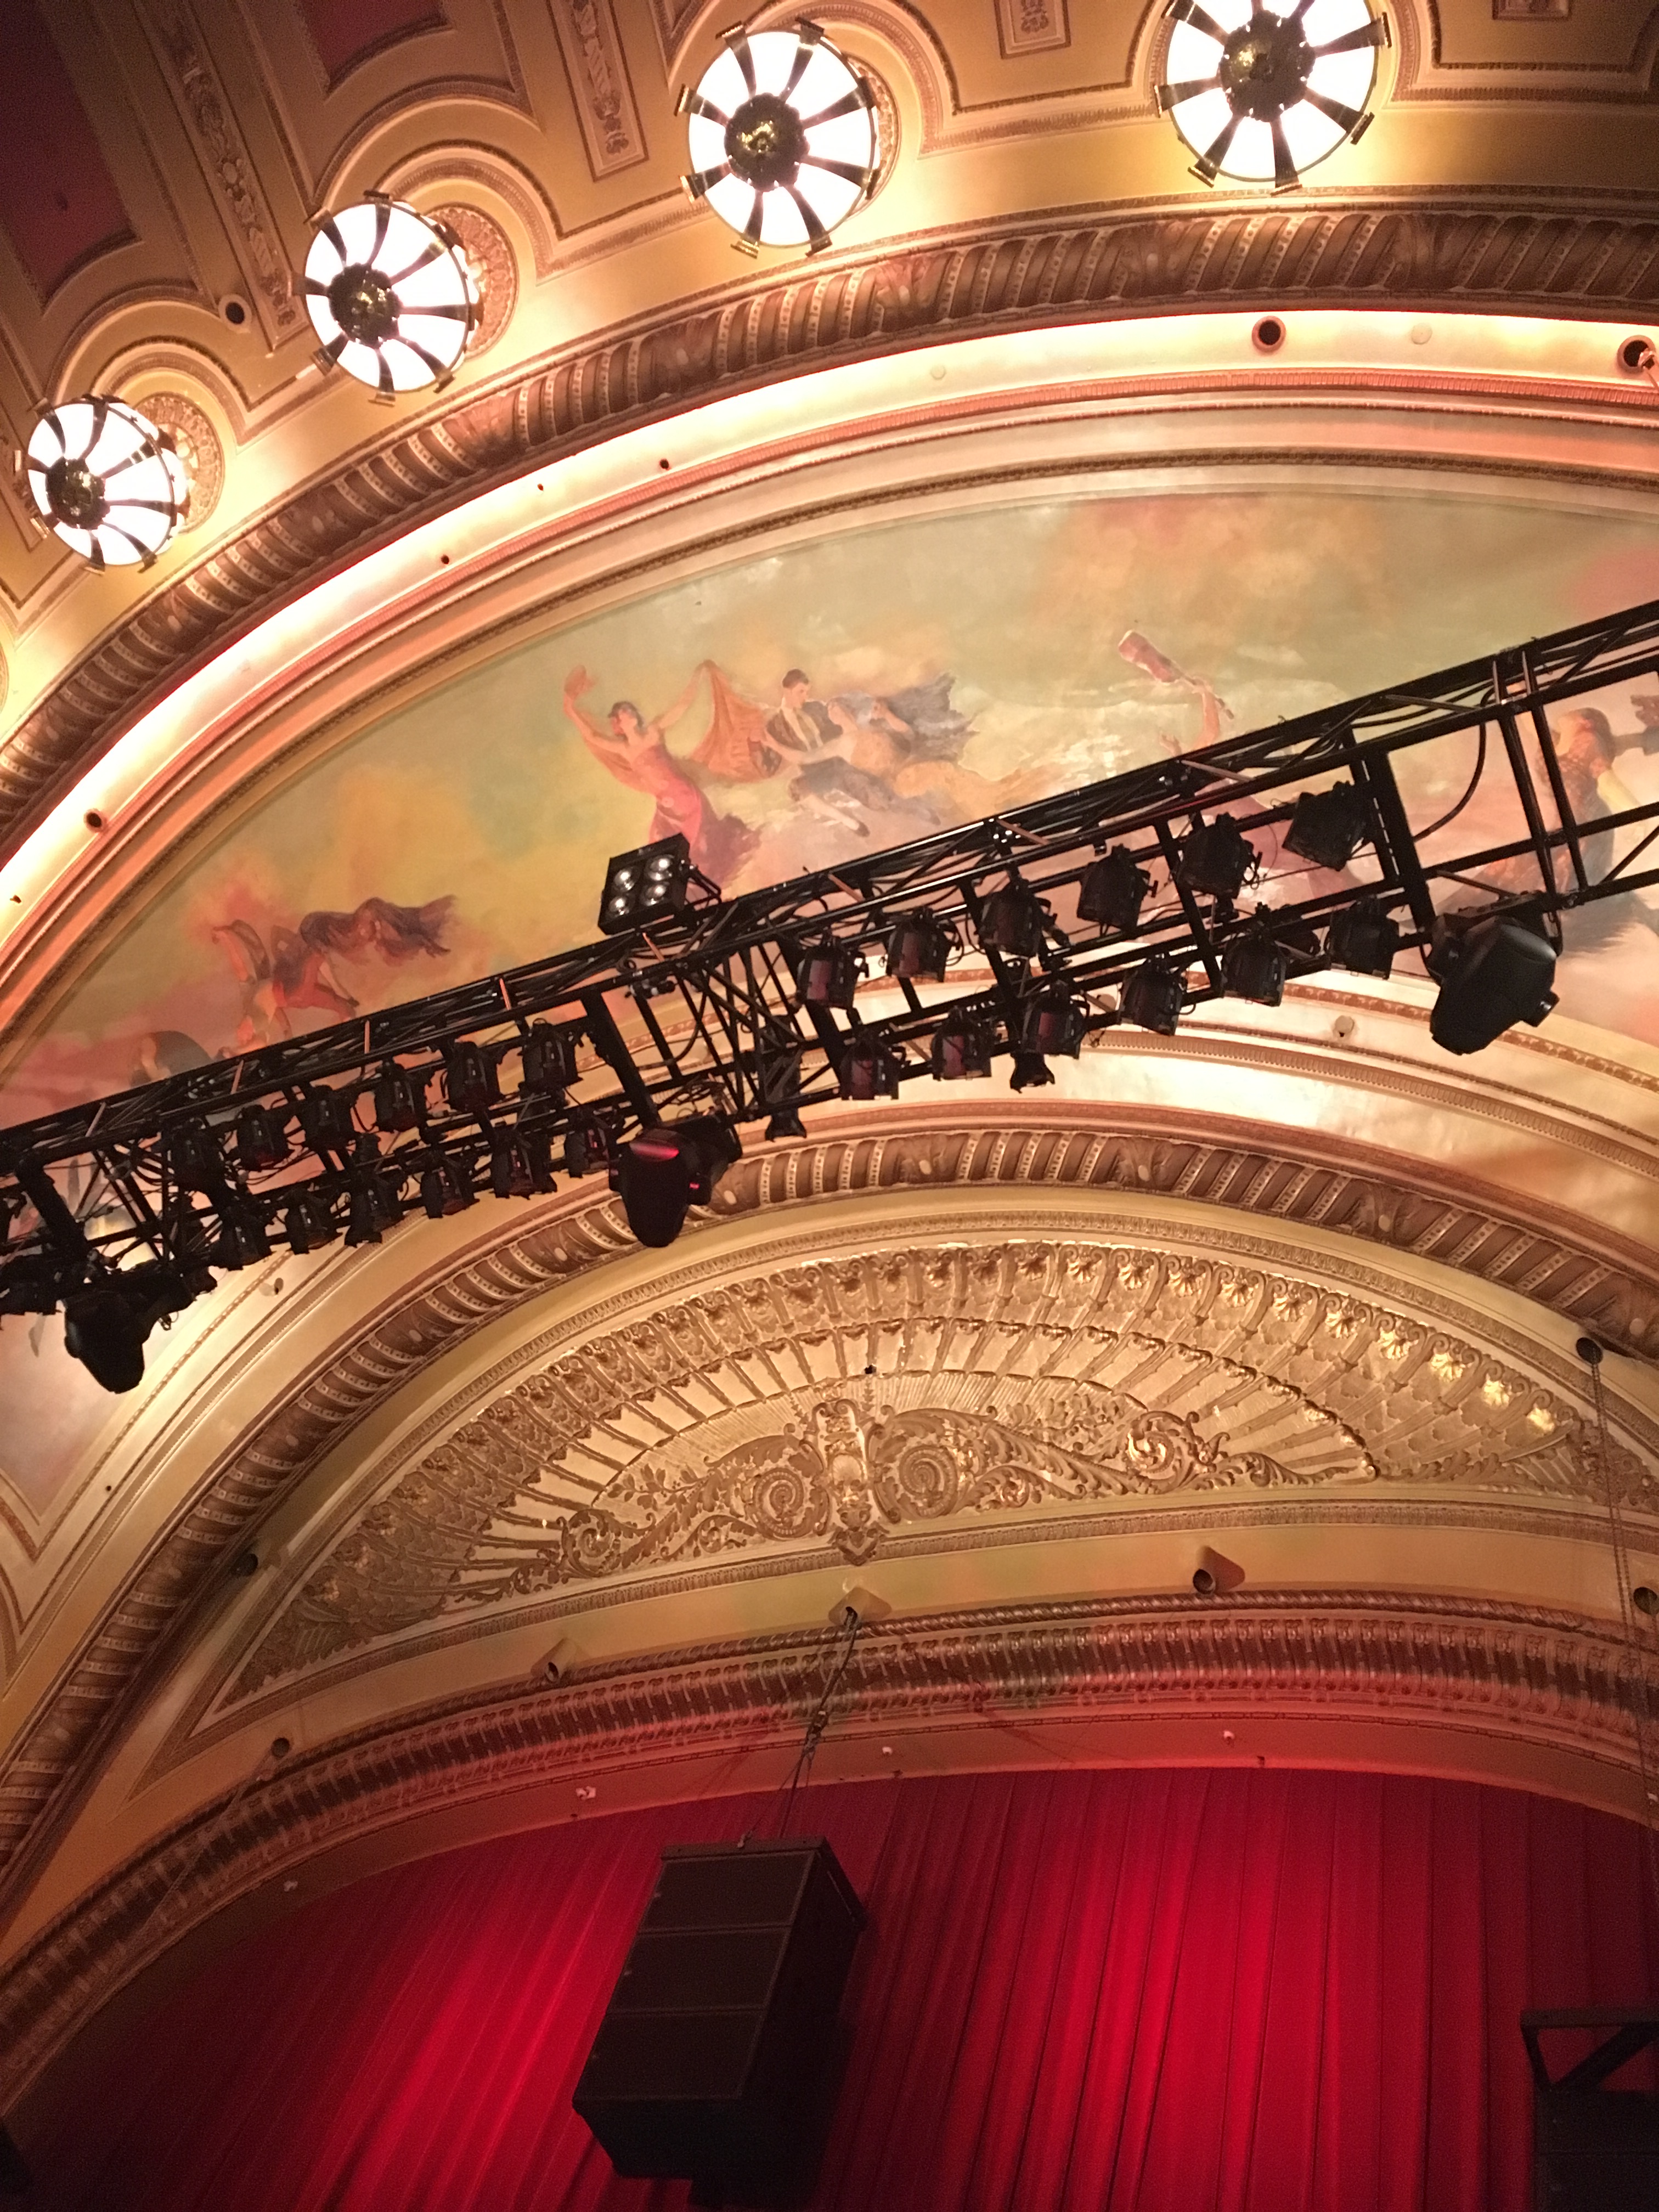 View of the ceiling of the Warfield in San Francisco, CA